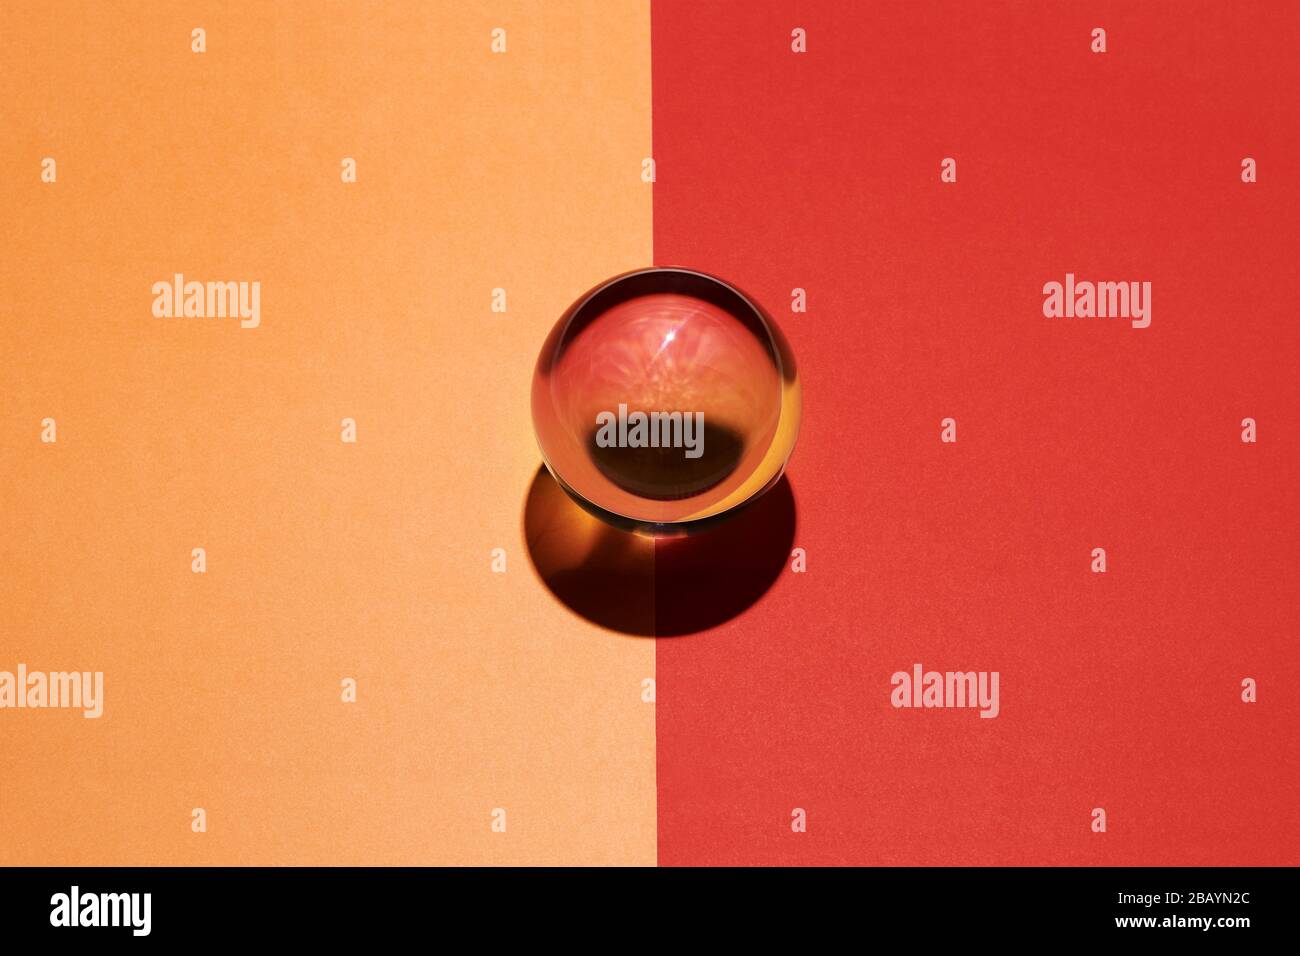 Glass sphere on a divided orange and red background placed in the center over the dividing line with internal blend of color Stock Photo